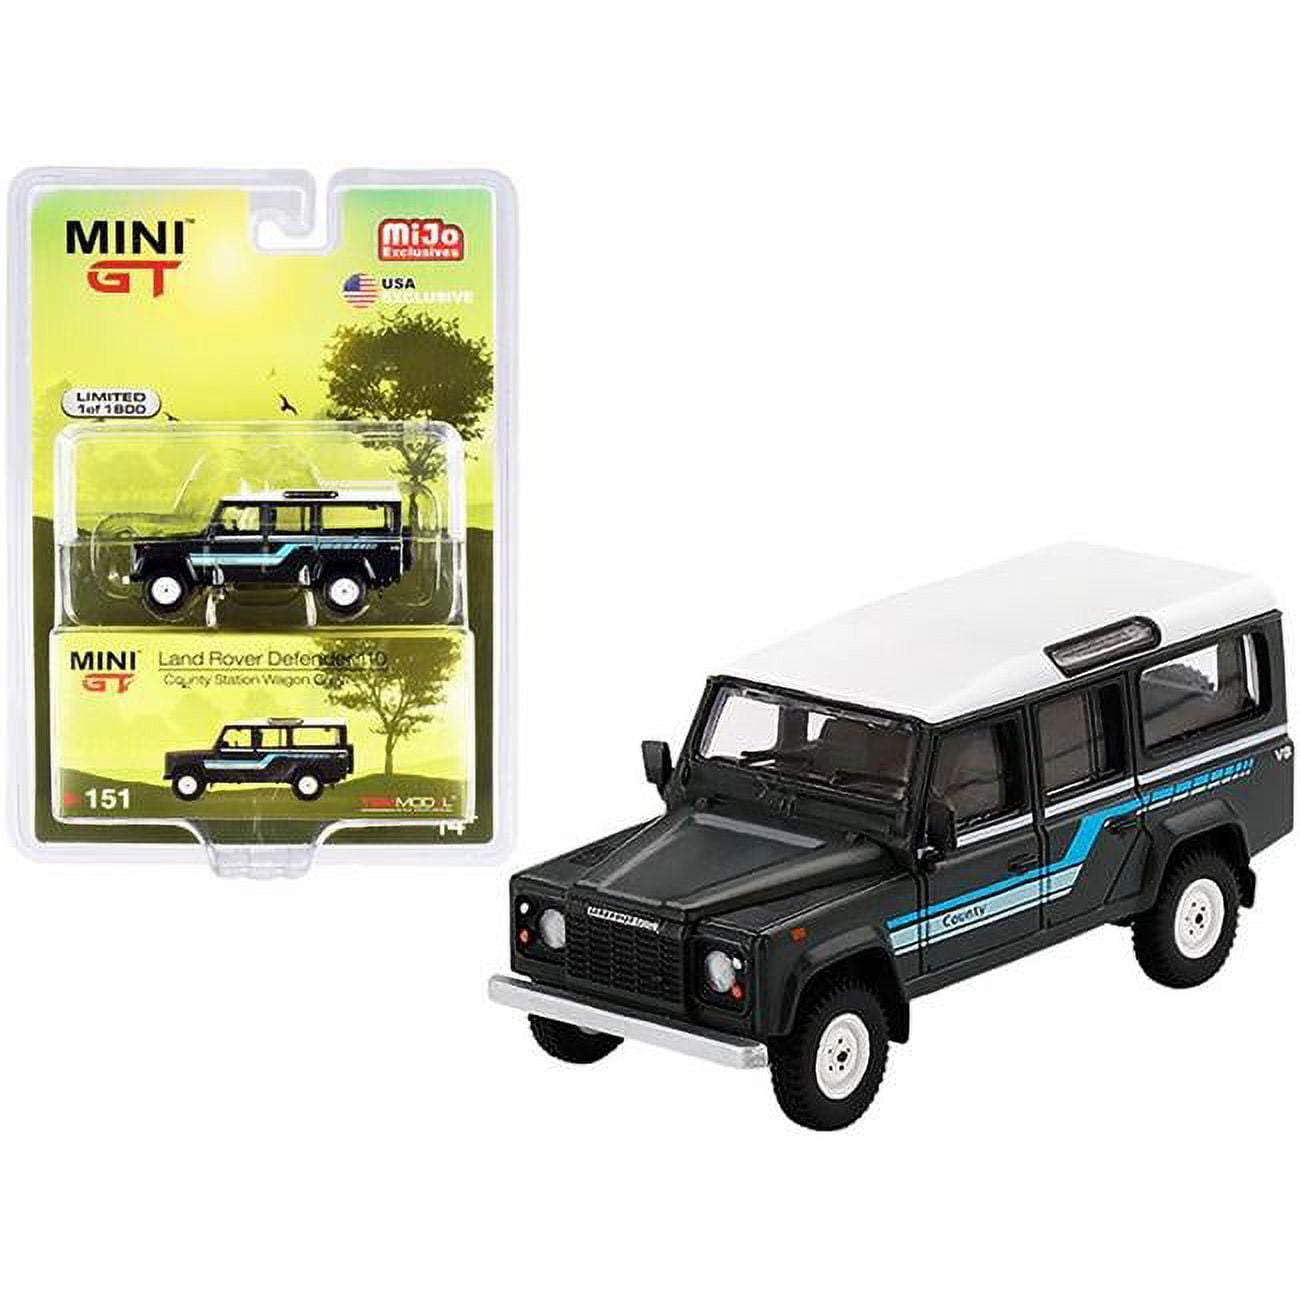 Picture of True Scale Miniatures MGT00151 0.16 4 Diecast Model Car for 1985 Land Rover Defender 110 County Station Wagon Dark Gray with White Top Limited Edition To Worldwide - 1800 Pieces